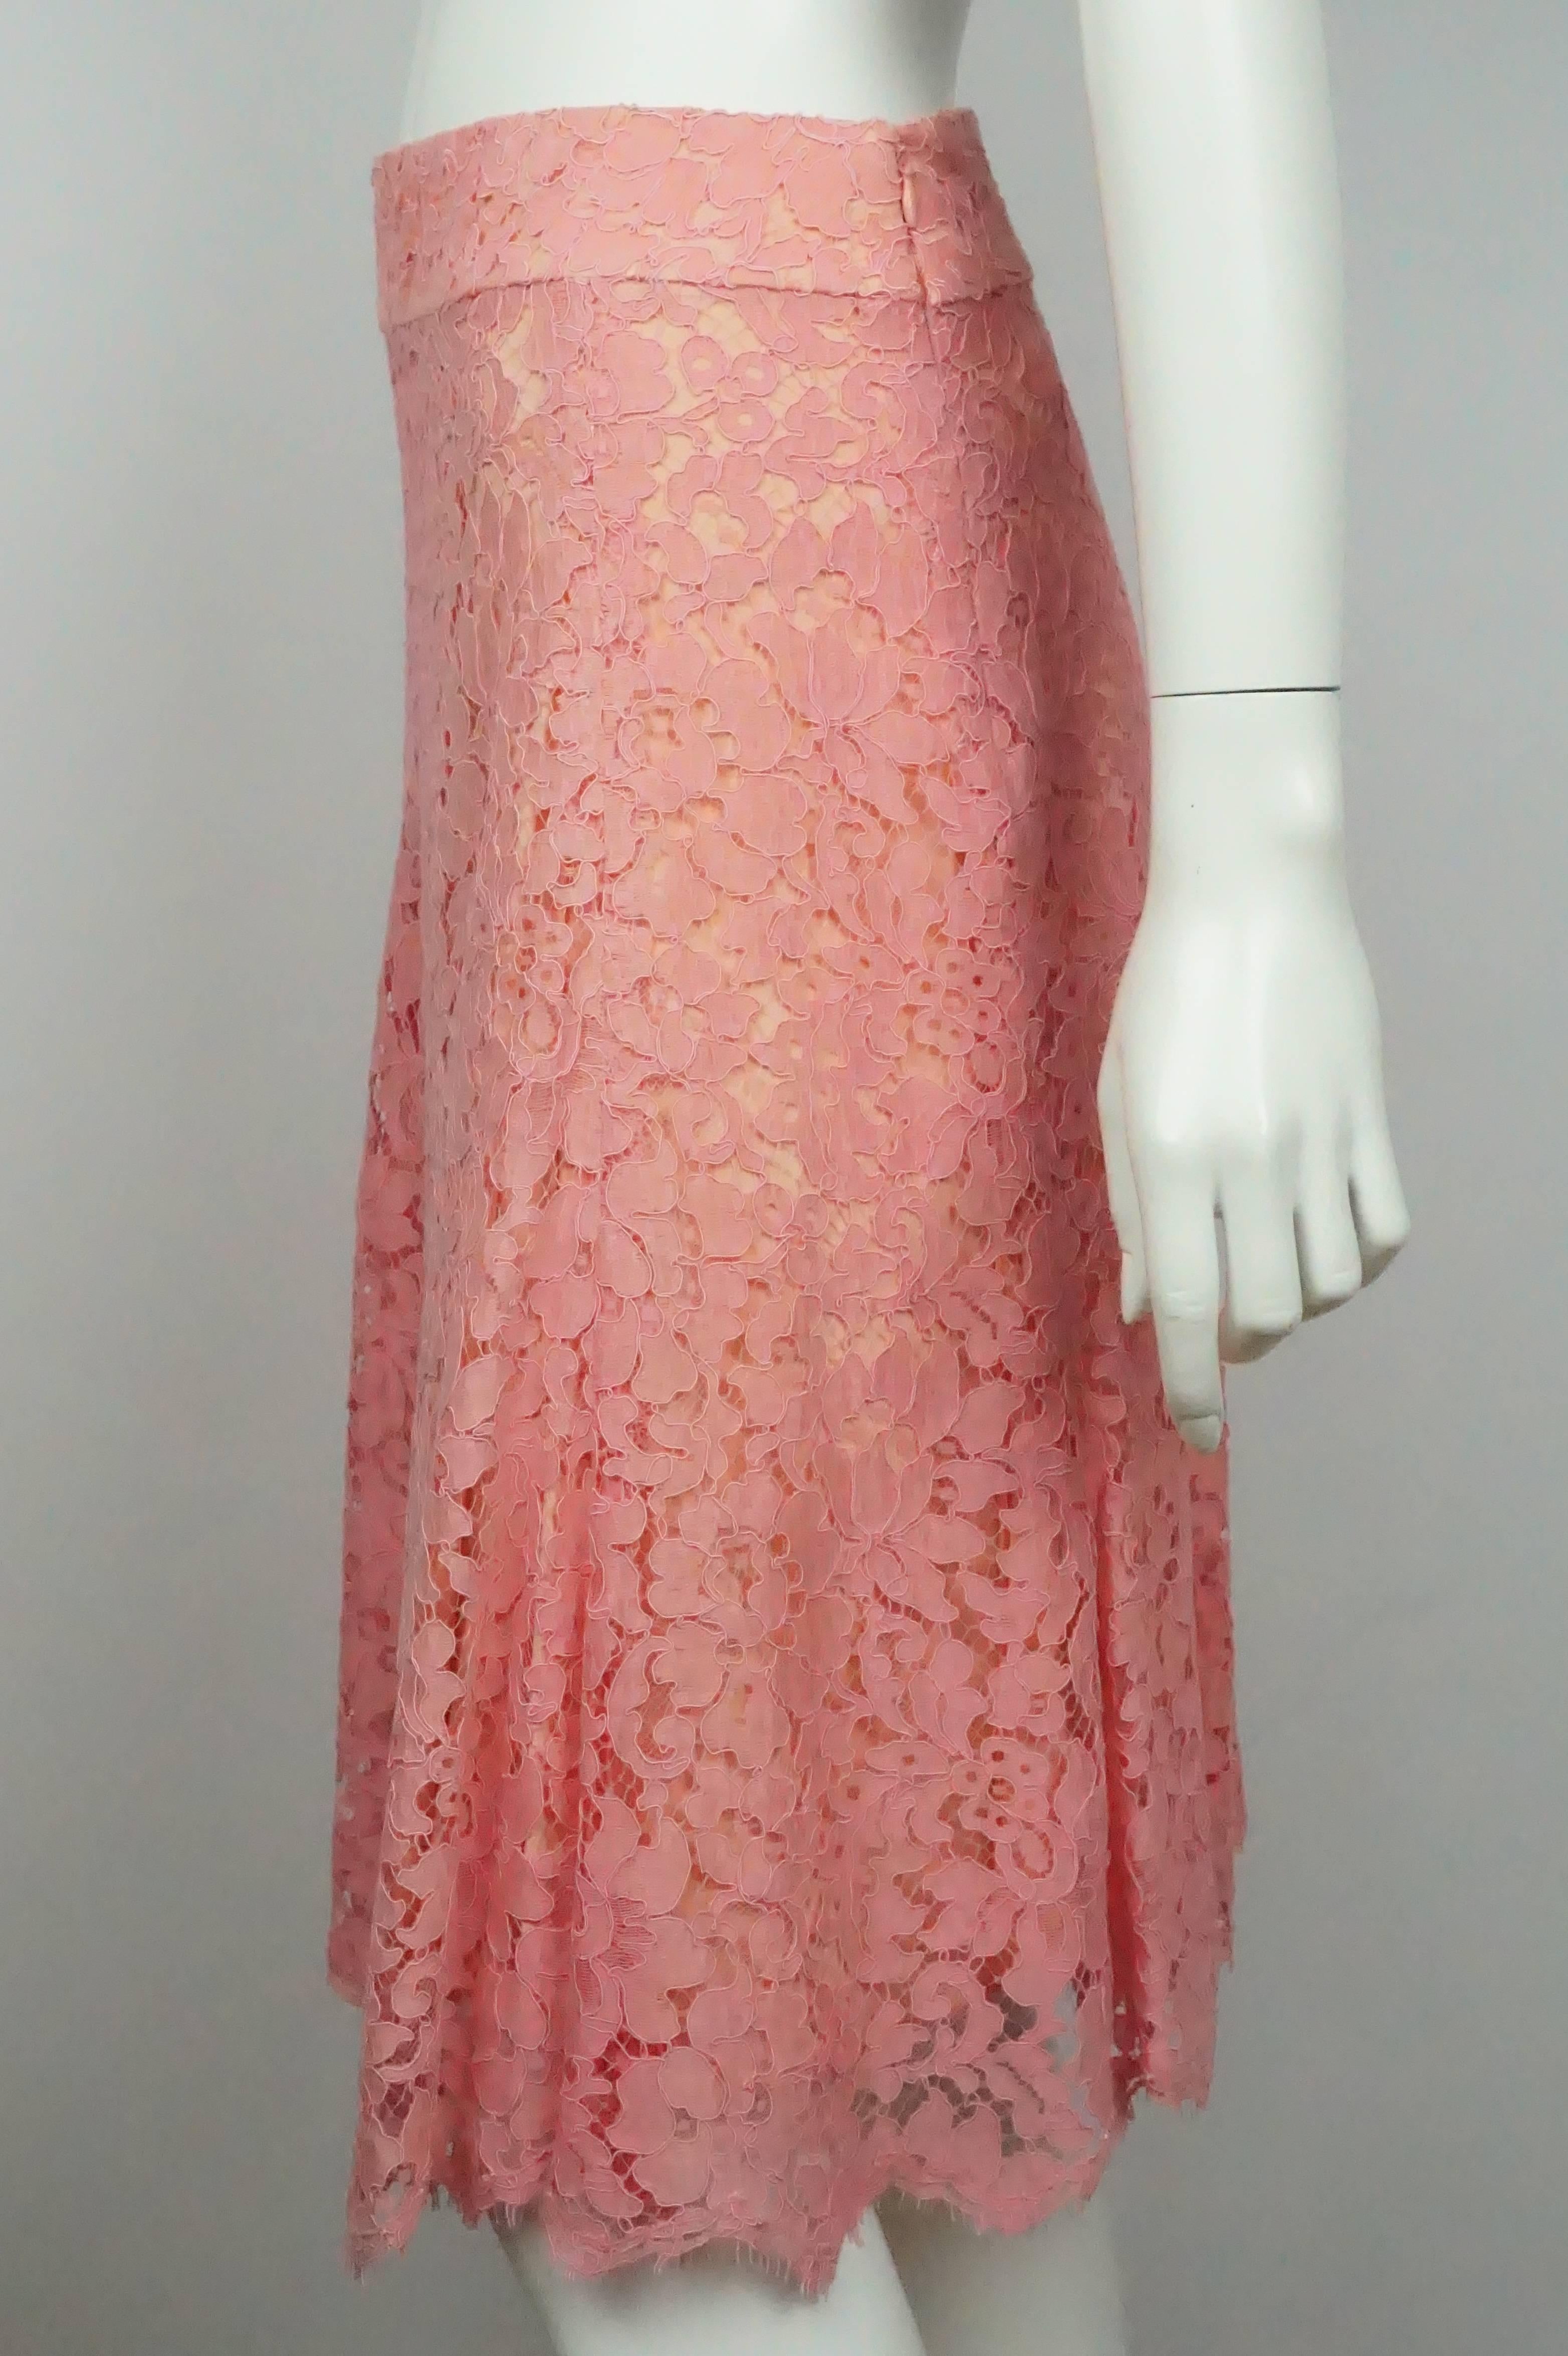 Monique Lhuillier Pink Coral Lace Skirt - 6  This gorgeous lace skirt is in excellent condition. This flare skirt is fitted on top and opens up at the bottom. The skirt is lined in silk and the outside is covered in lace. There is a back zipper with